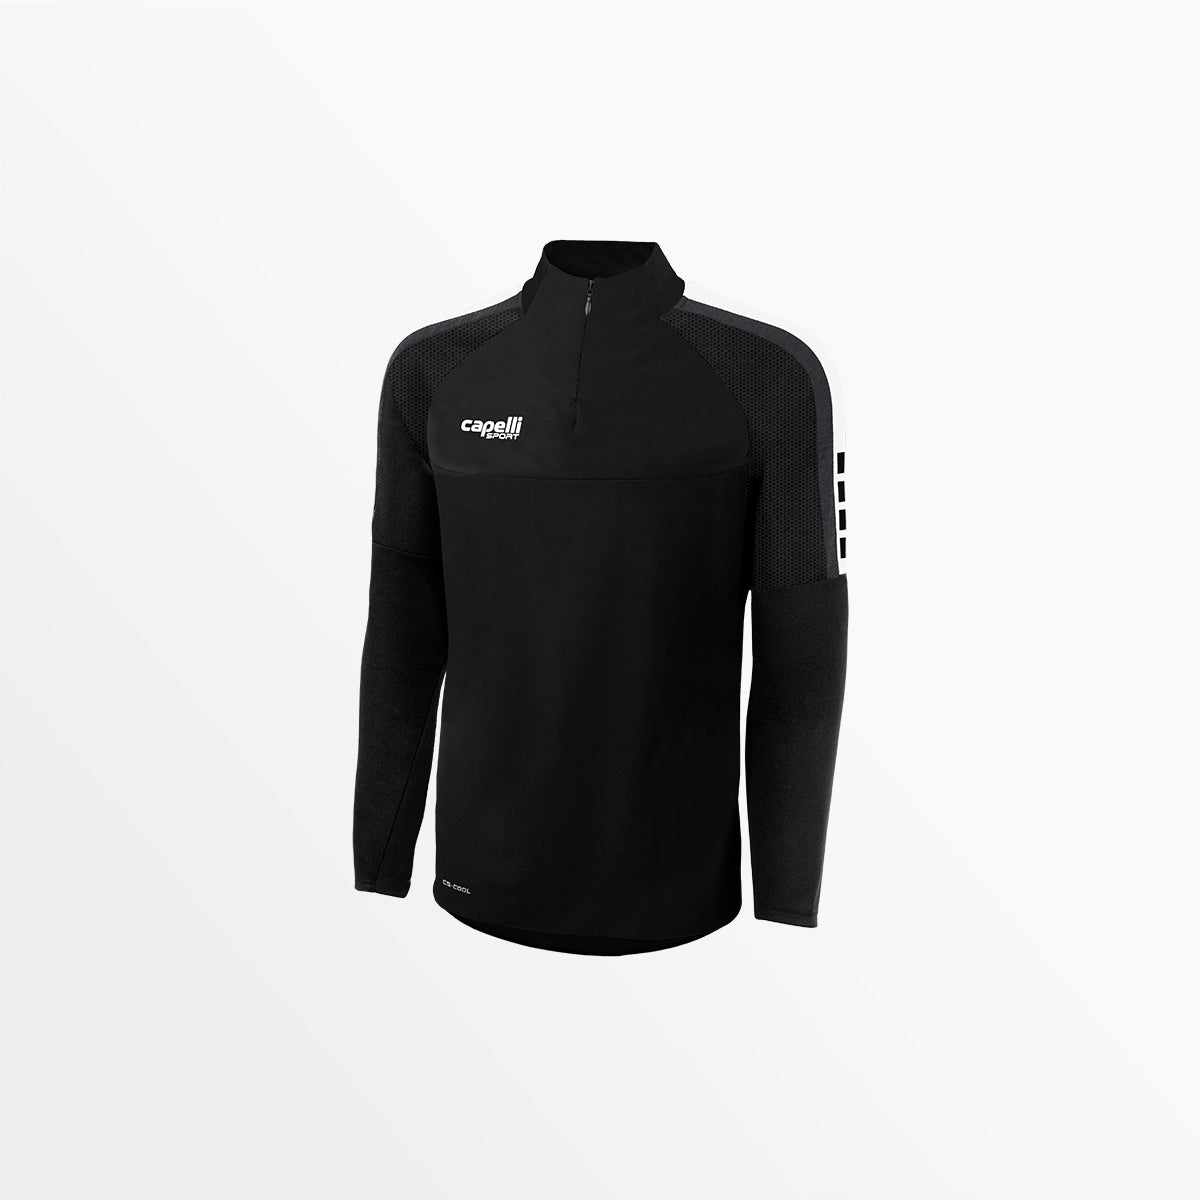 YOUTH MADISON 1/4 ZIP TECHNICAL TRAINING TOP